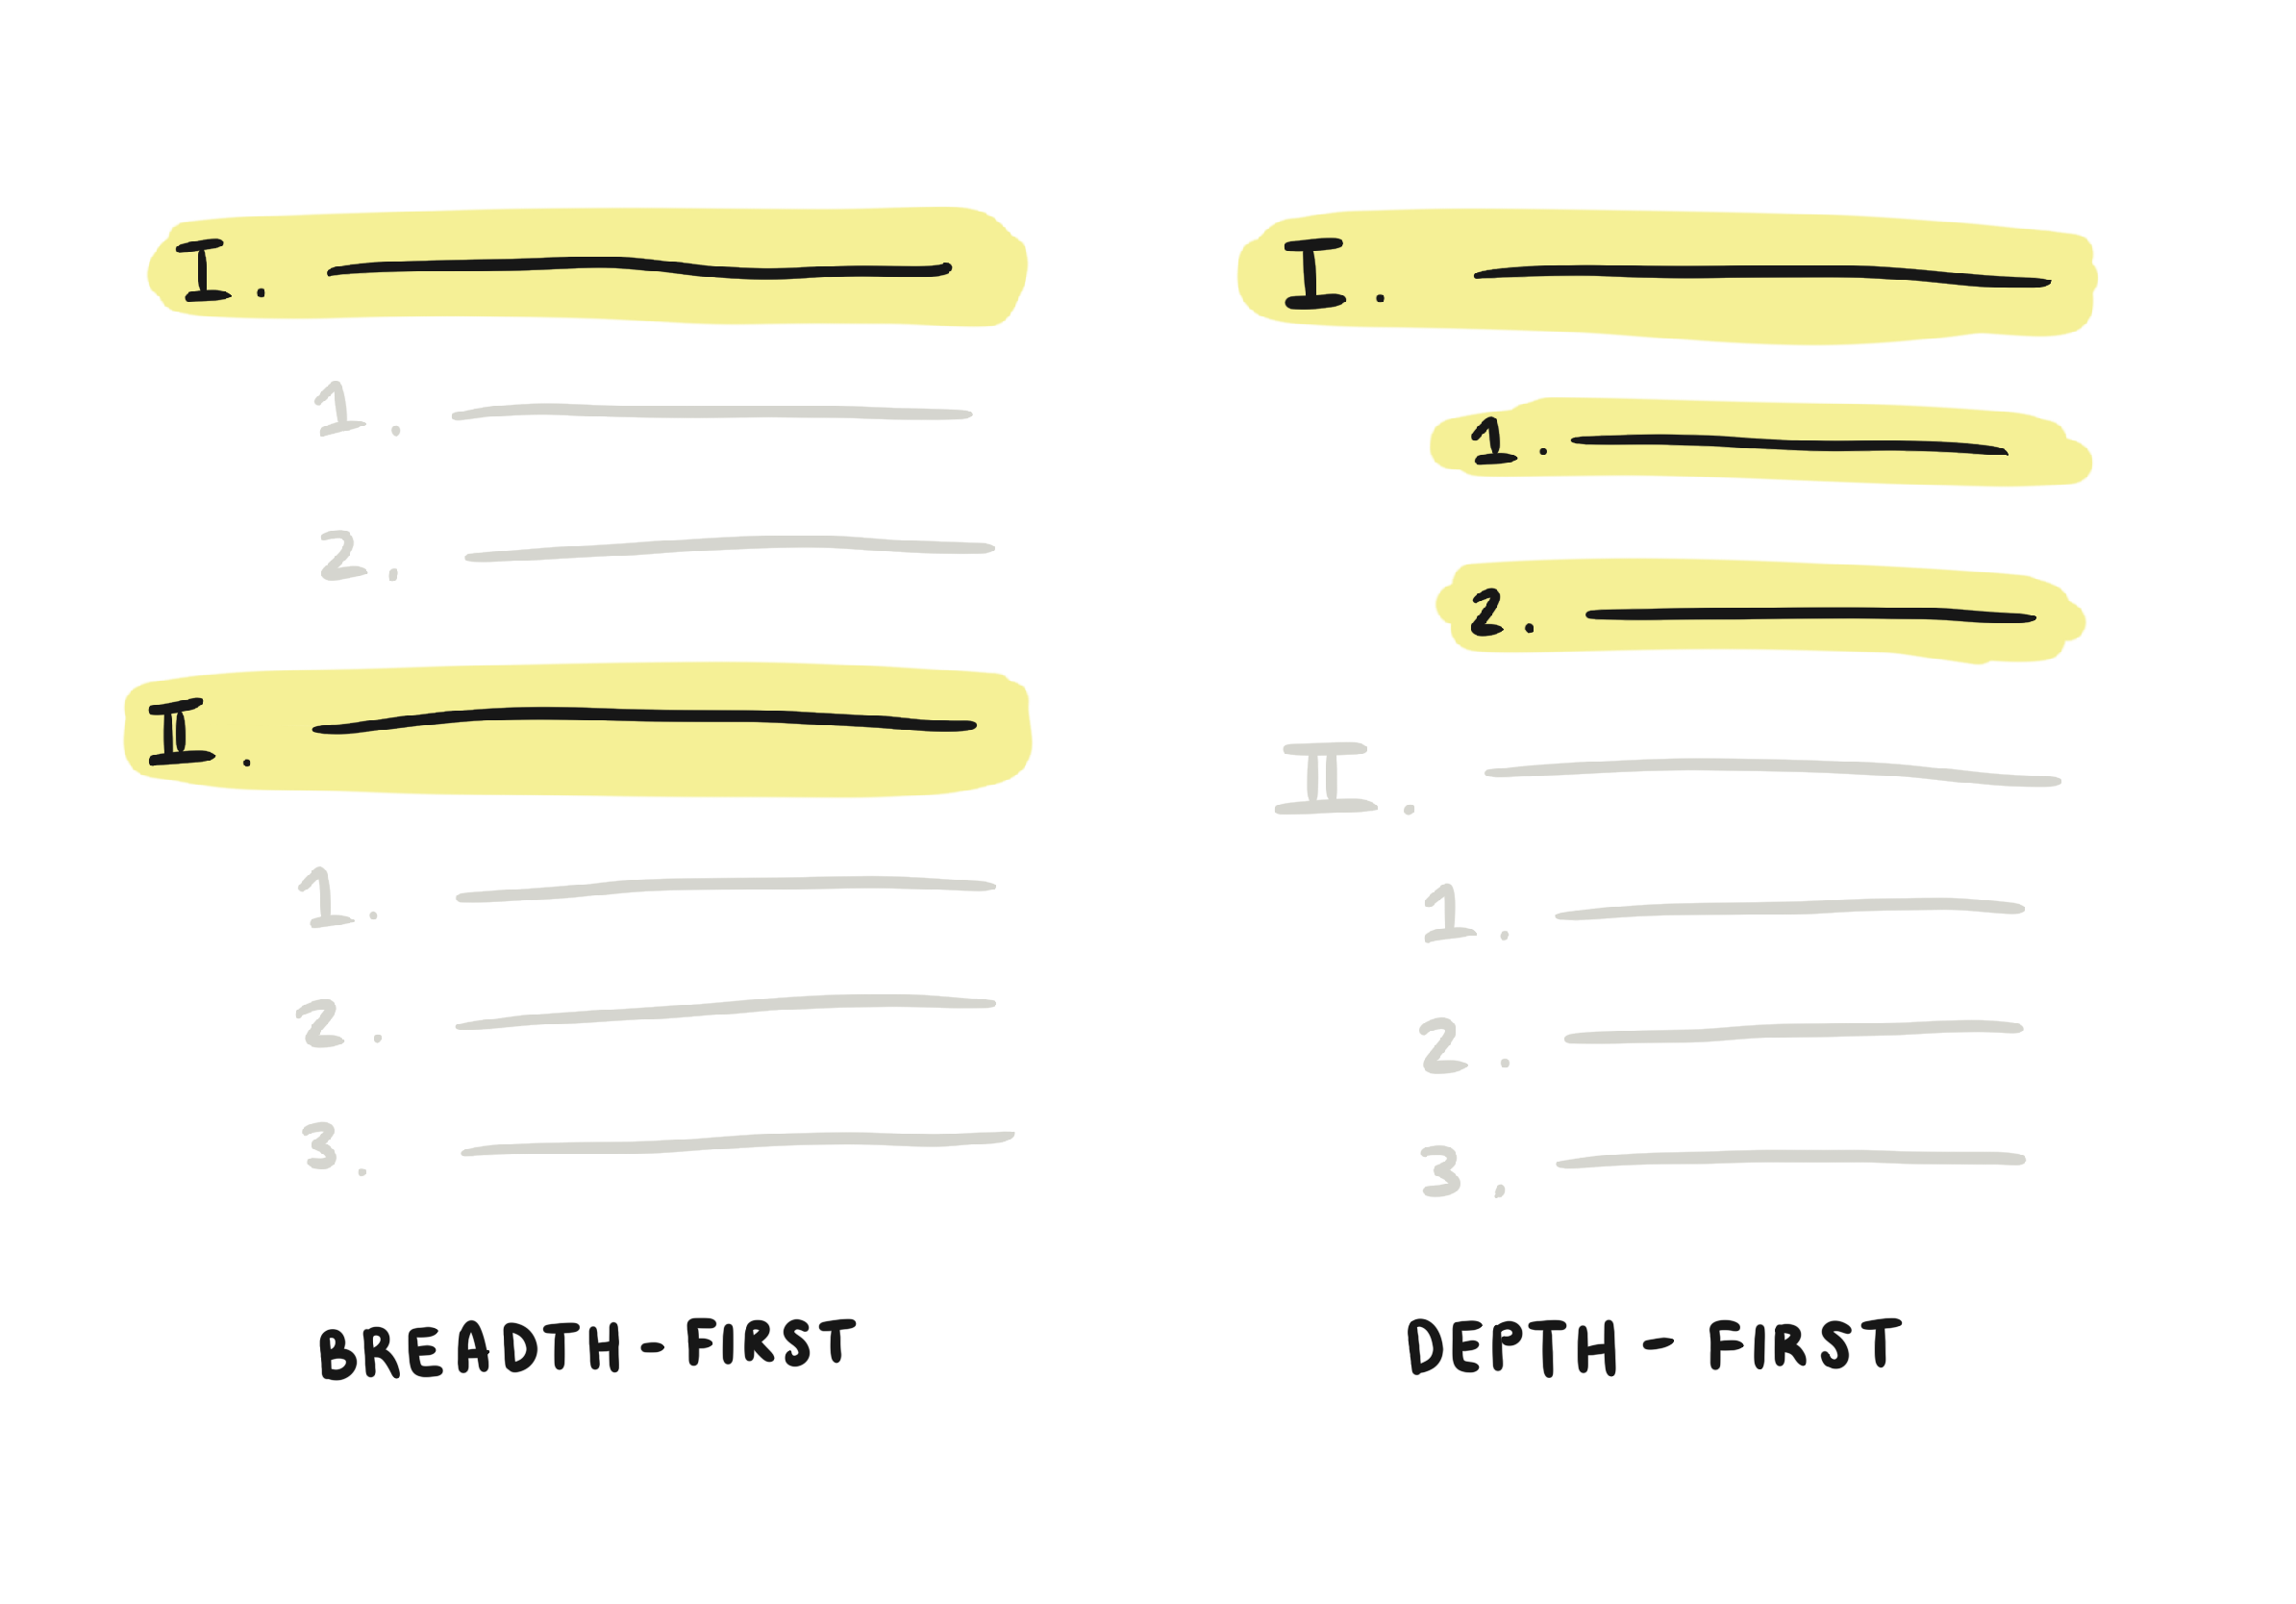 Breadth-first pagination (left) returns the "skeleton" of a page, requiring additional fetches to flesh out each block. Depth-first pagination (right) returns complete subtrees, but might require many fetches to make it all the way down the page.